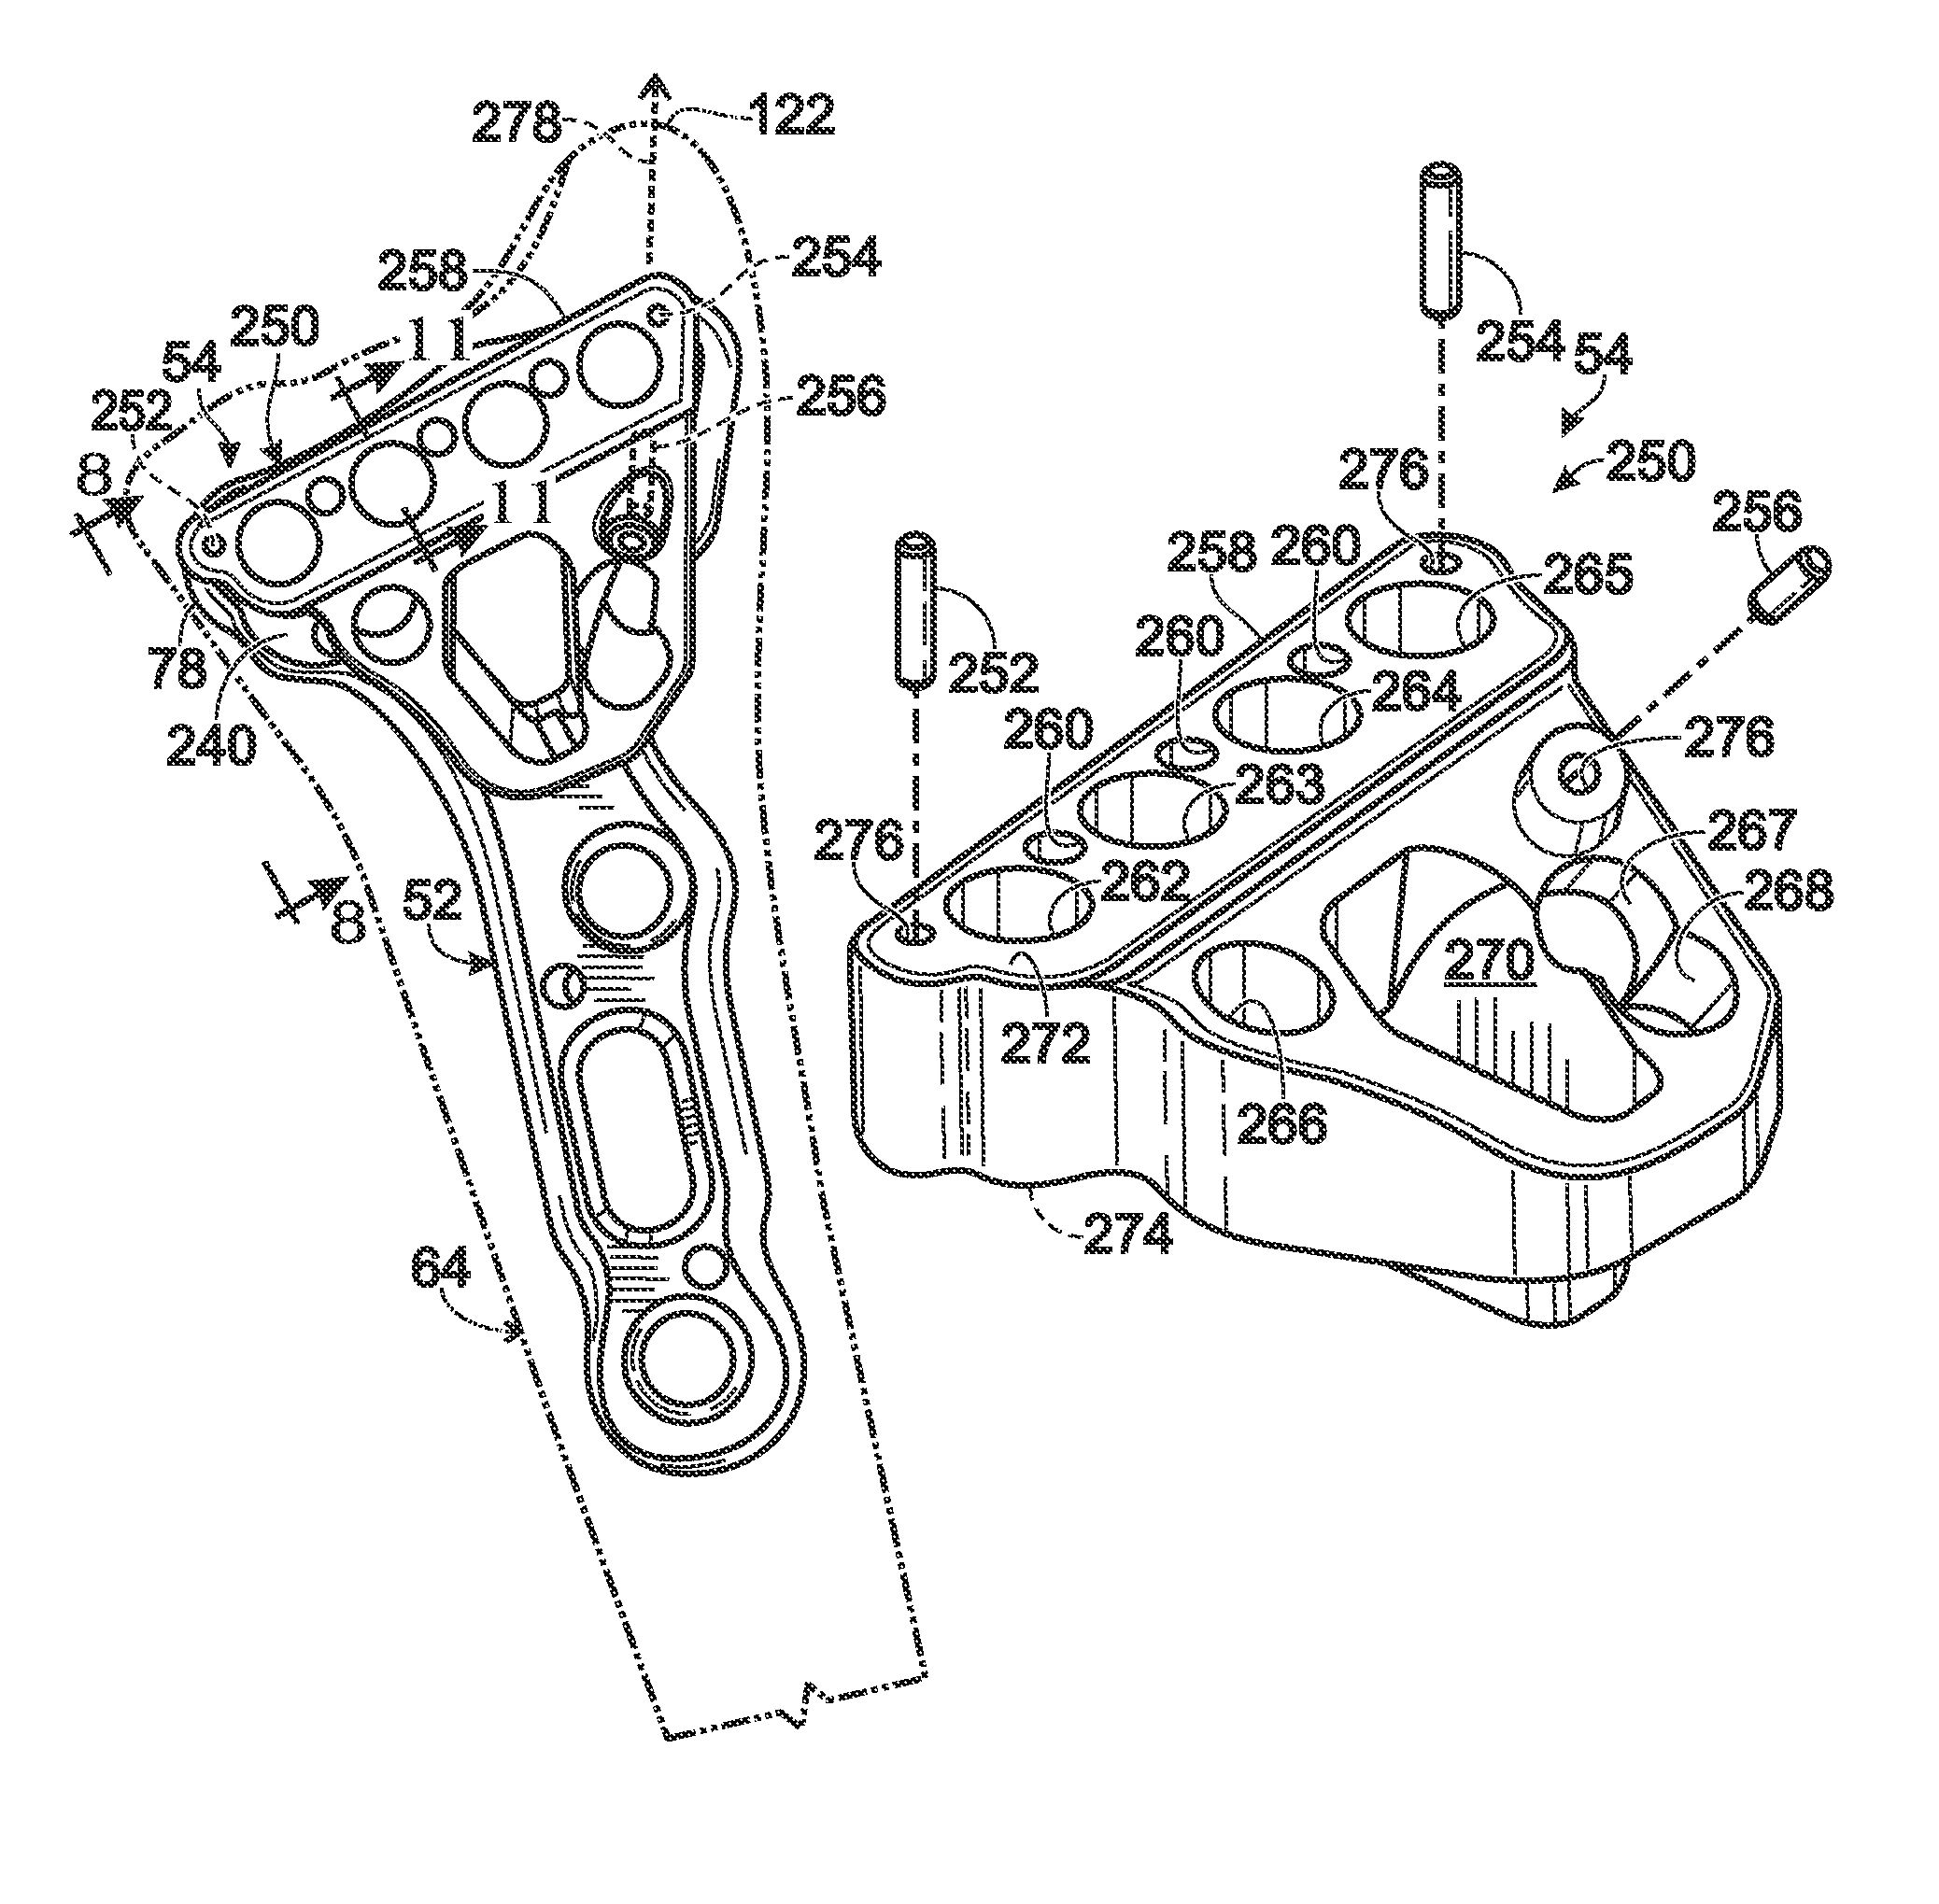 Targeting guide with a radiopaque marker to facilitate positioning a bone plate on bone